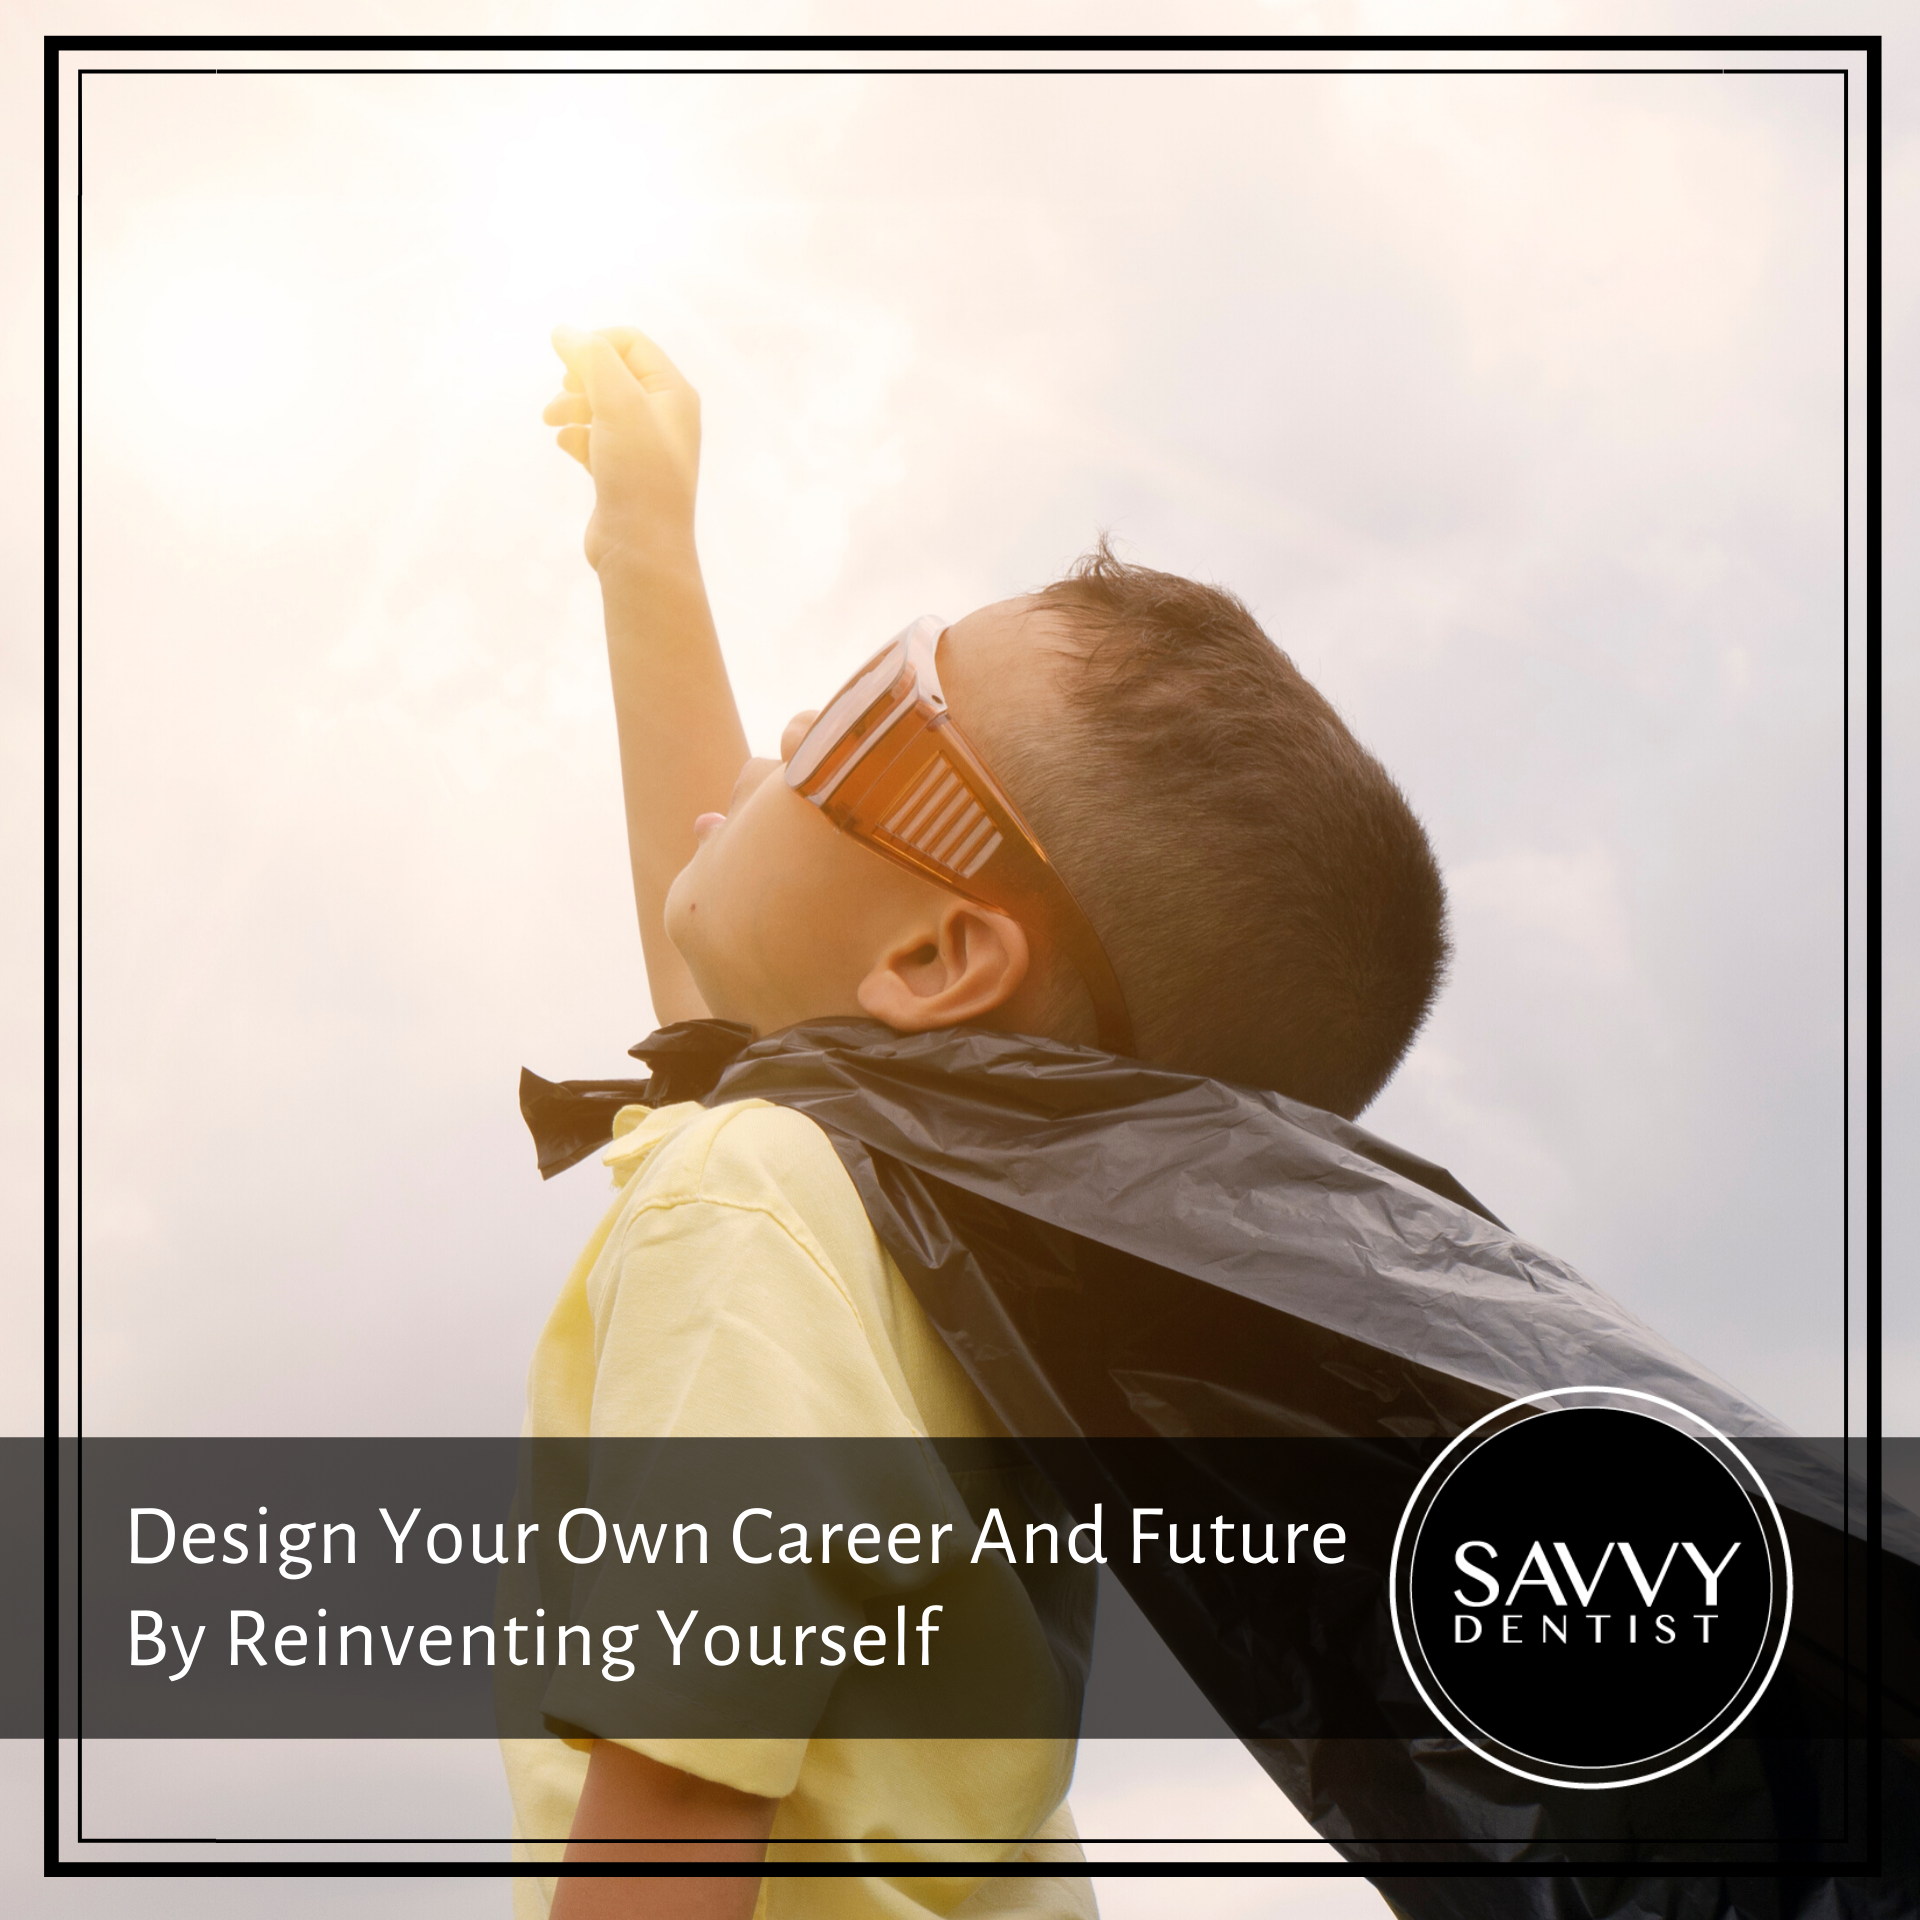 Design Your Own Career And Future By Reinventing Yourself